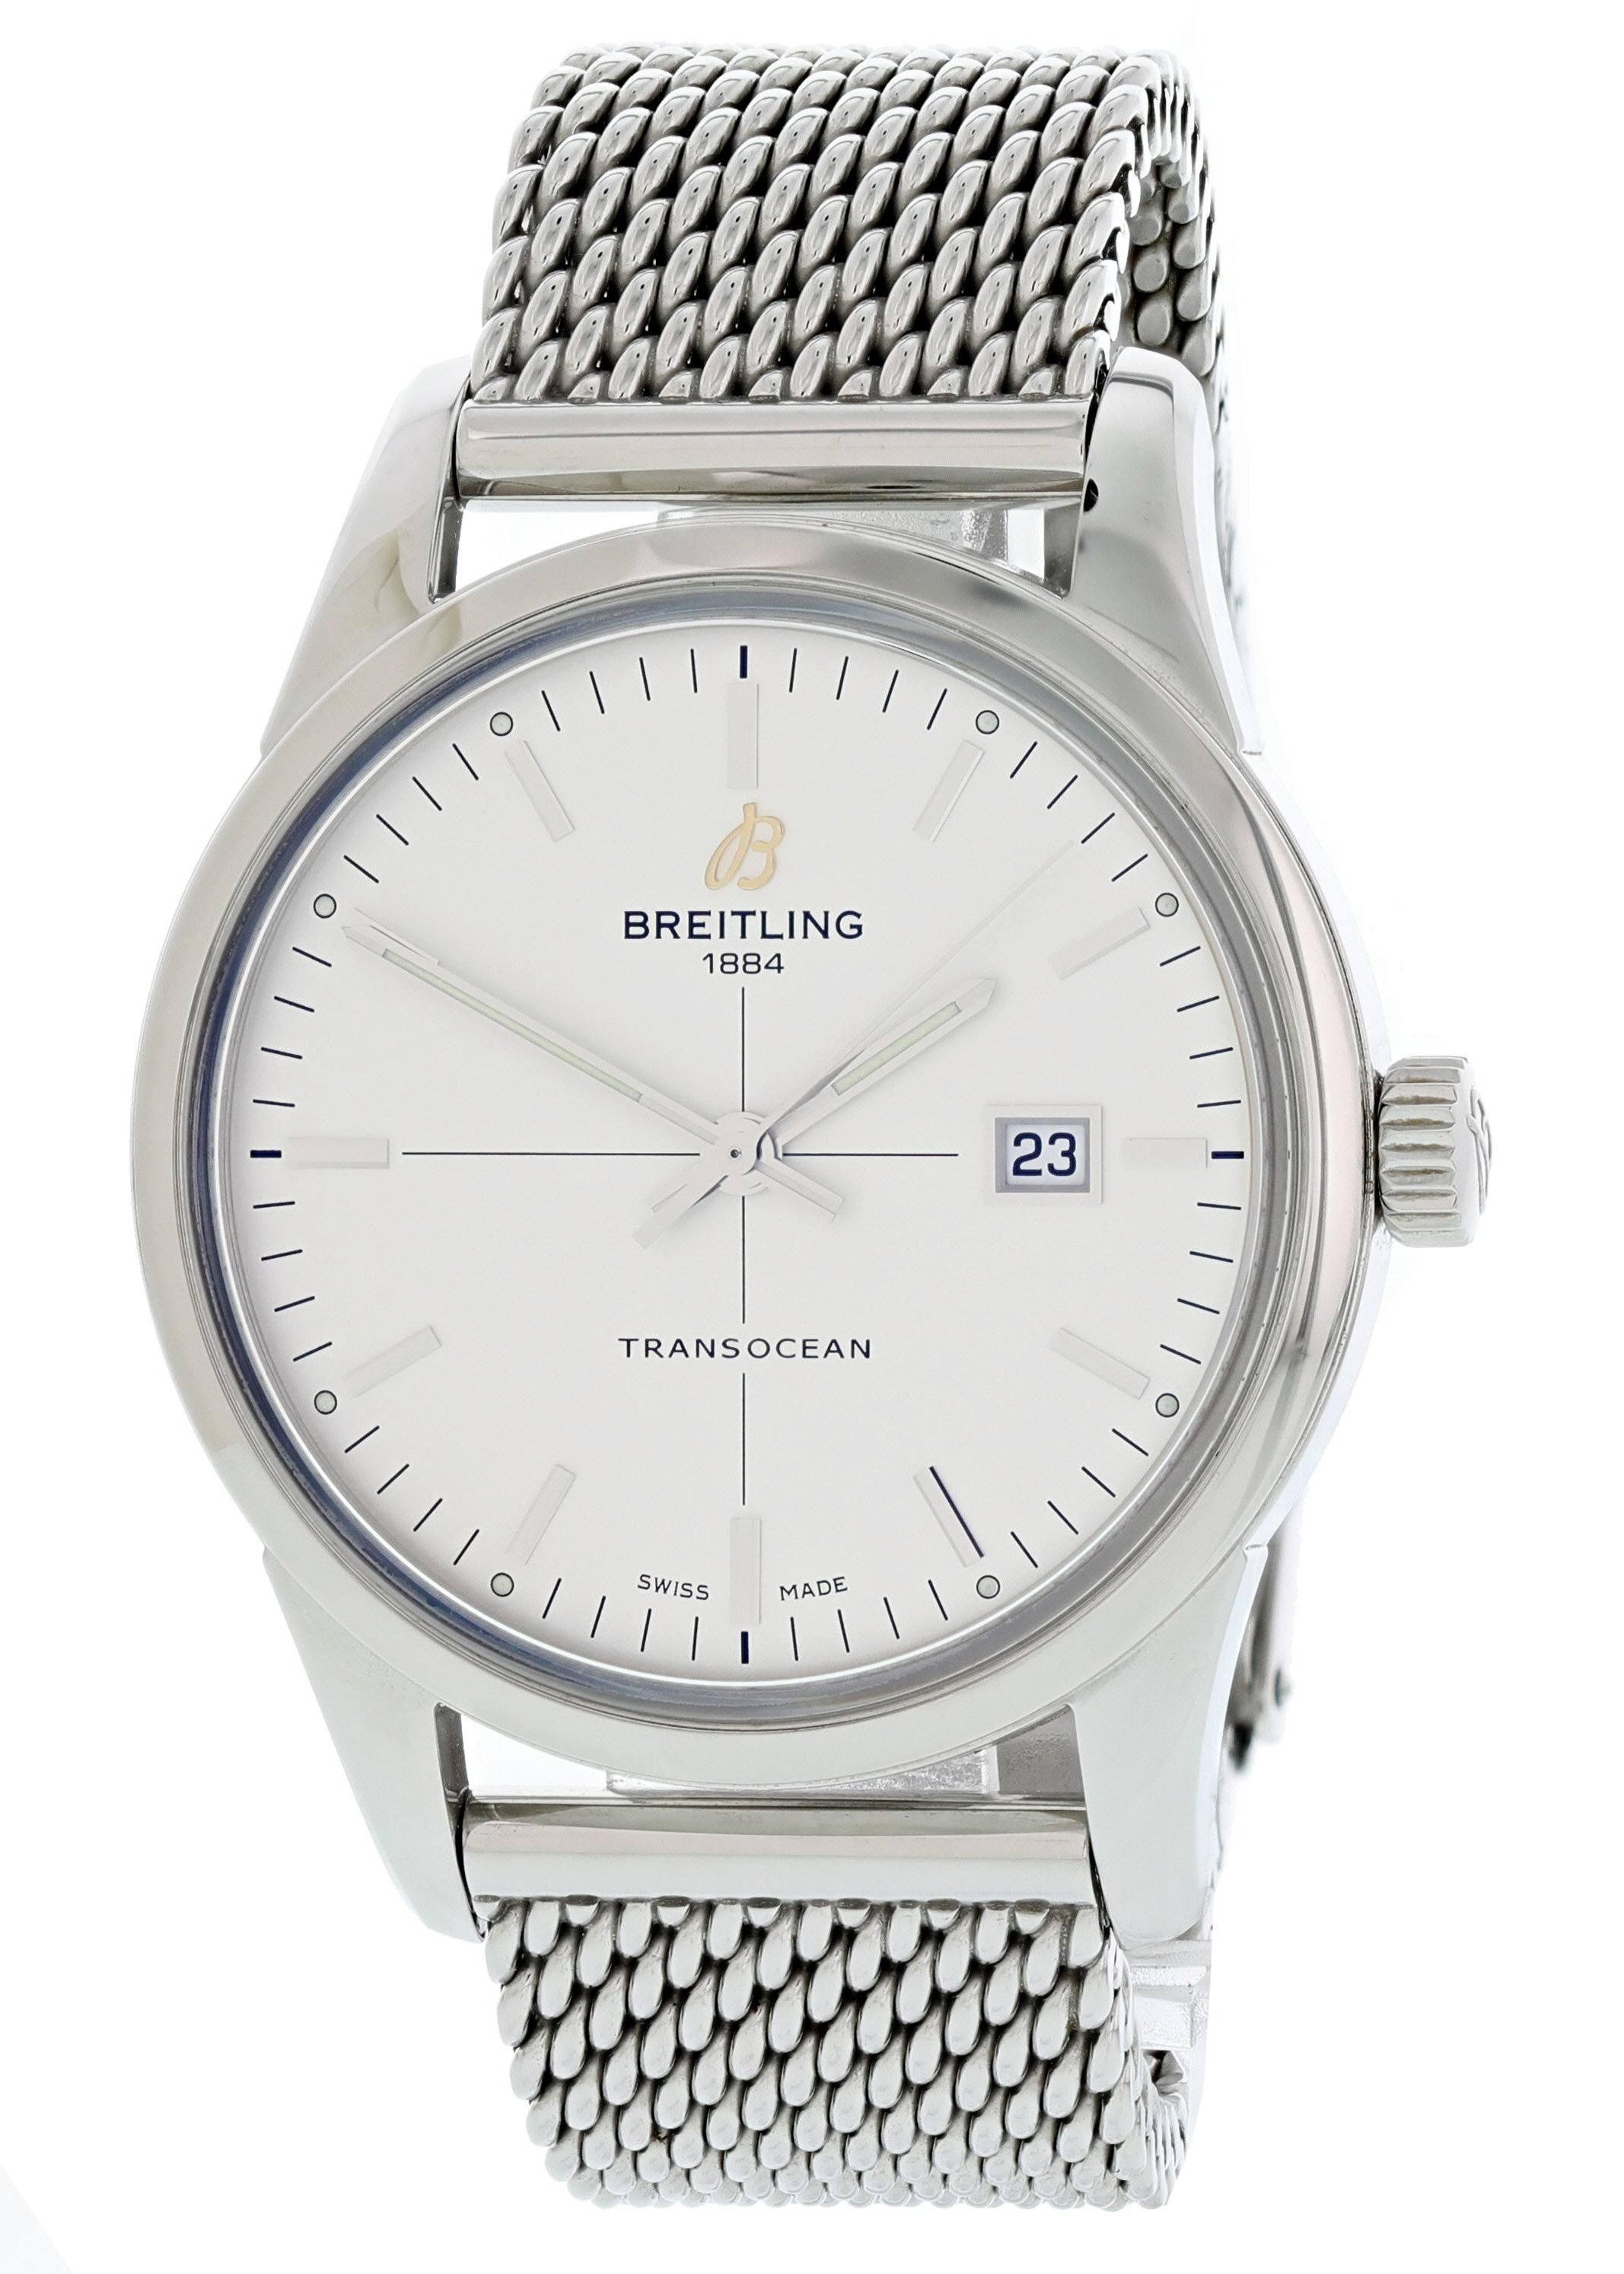 Breitling Transocean A10360 Mens Watch. Stainless Steel 43mm case with a fluted crown. Silver dial with steel hands and hour indexes. Stainless steel Milanese bracelet with stainless steel fold-over clasp. Sapphire crystal glass. Automatic movement.